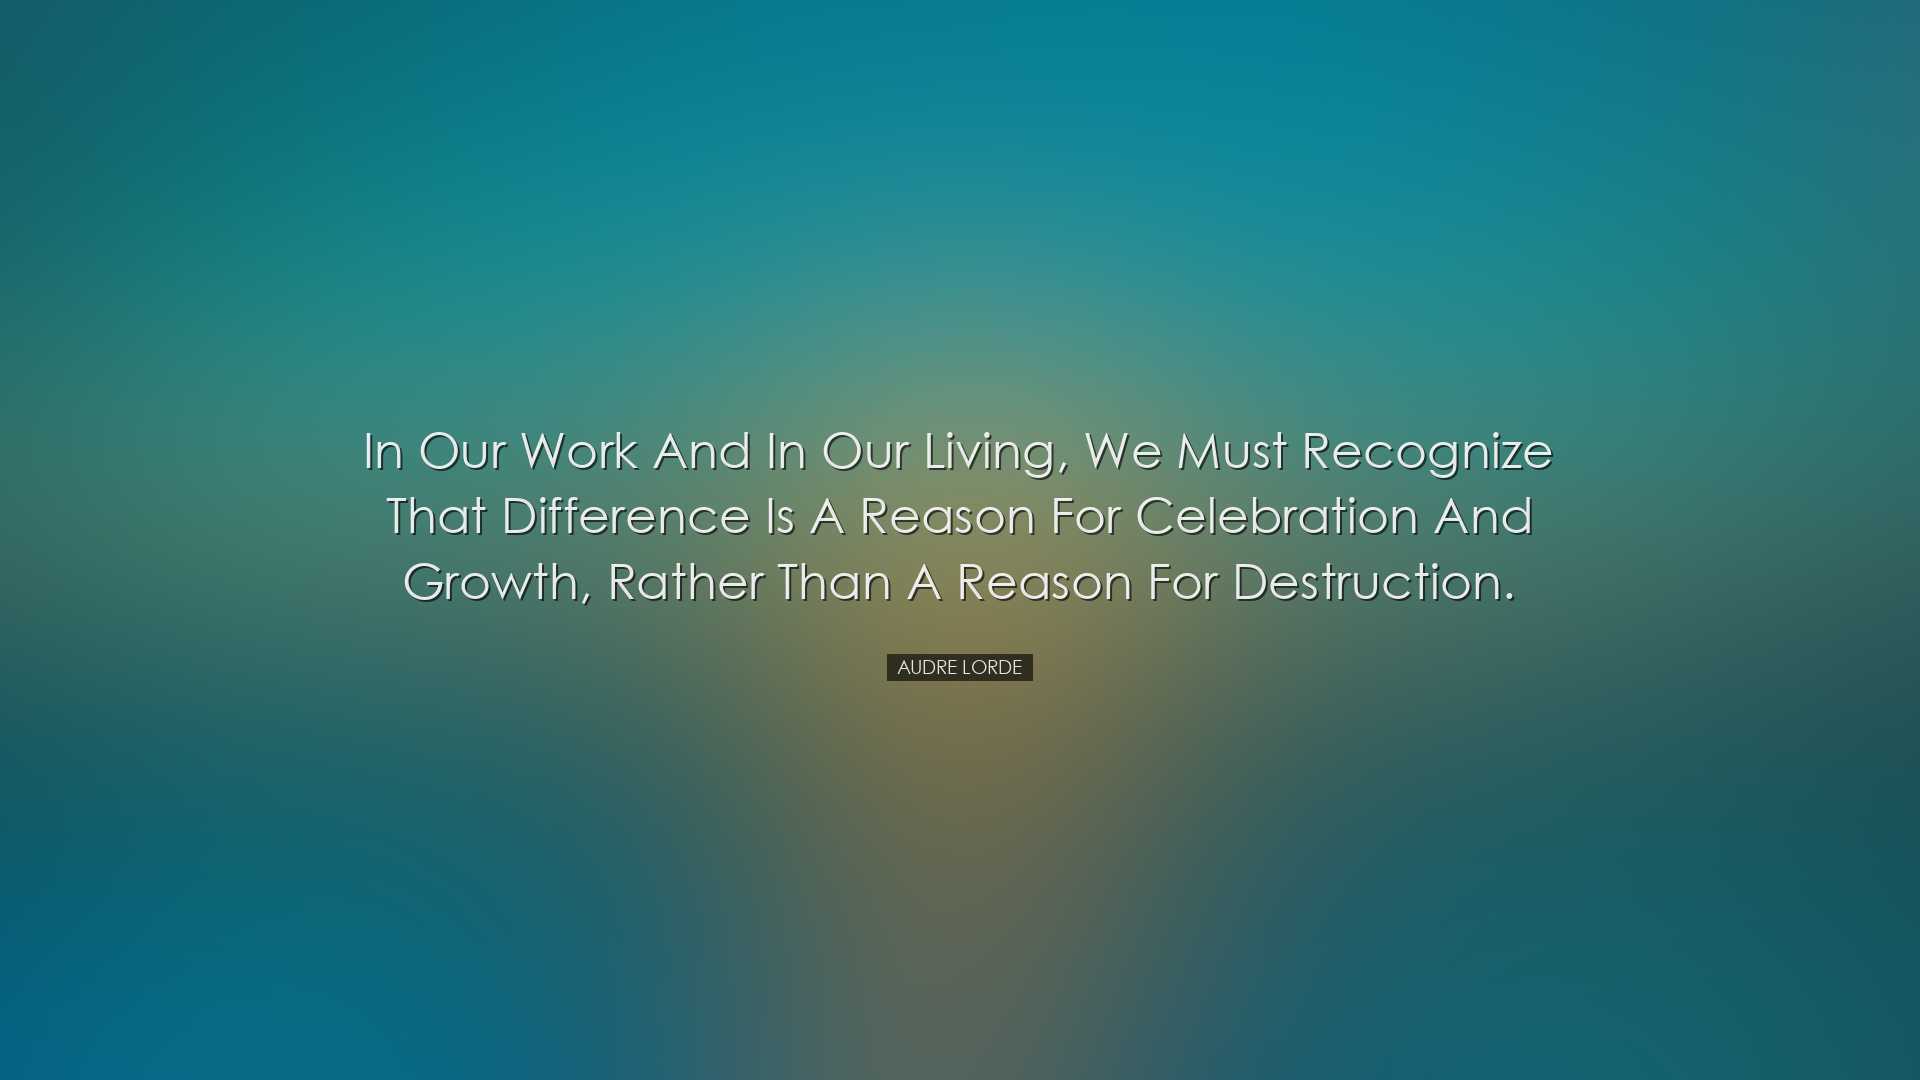 In our work and in our living, we must recognize that difference i